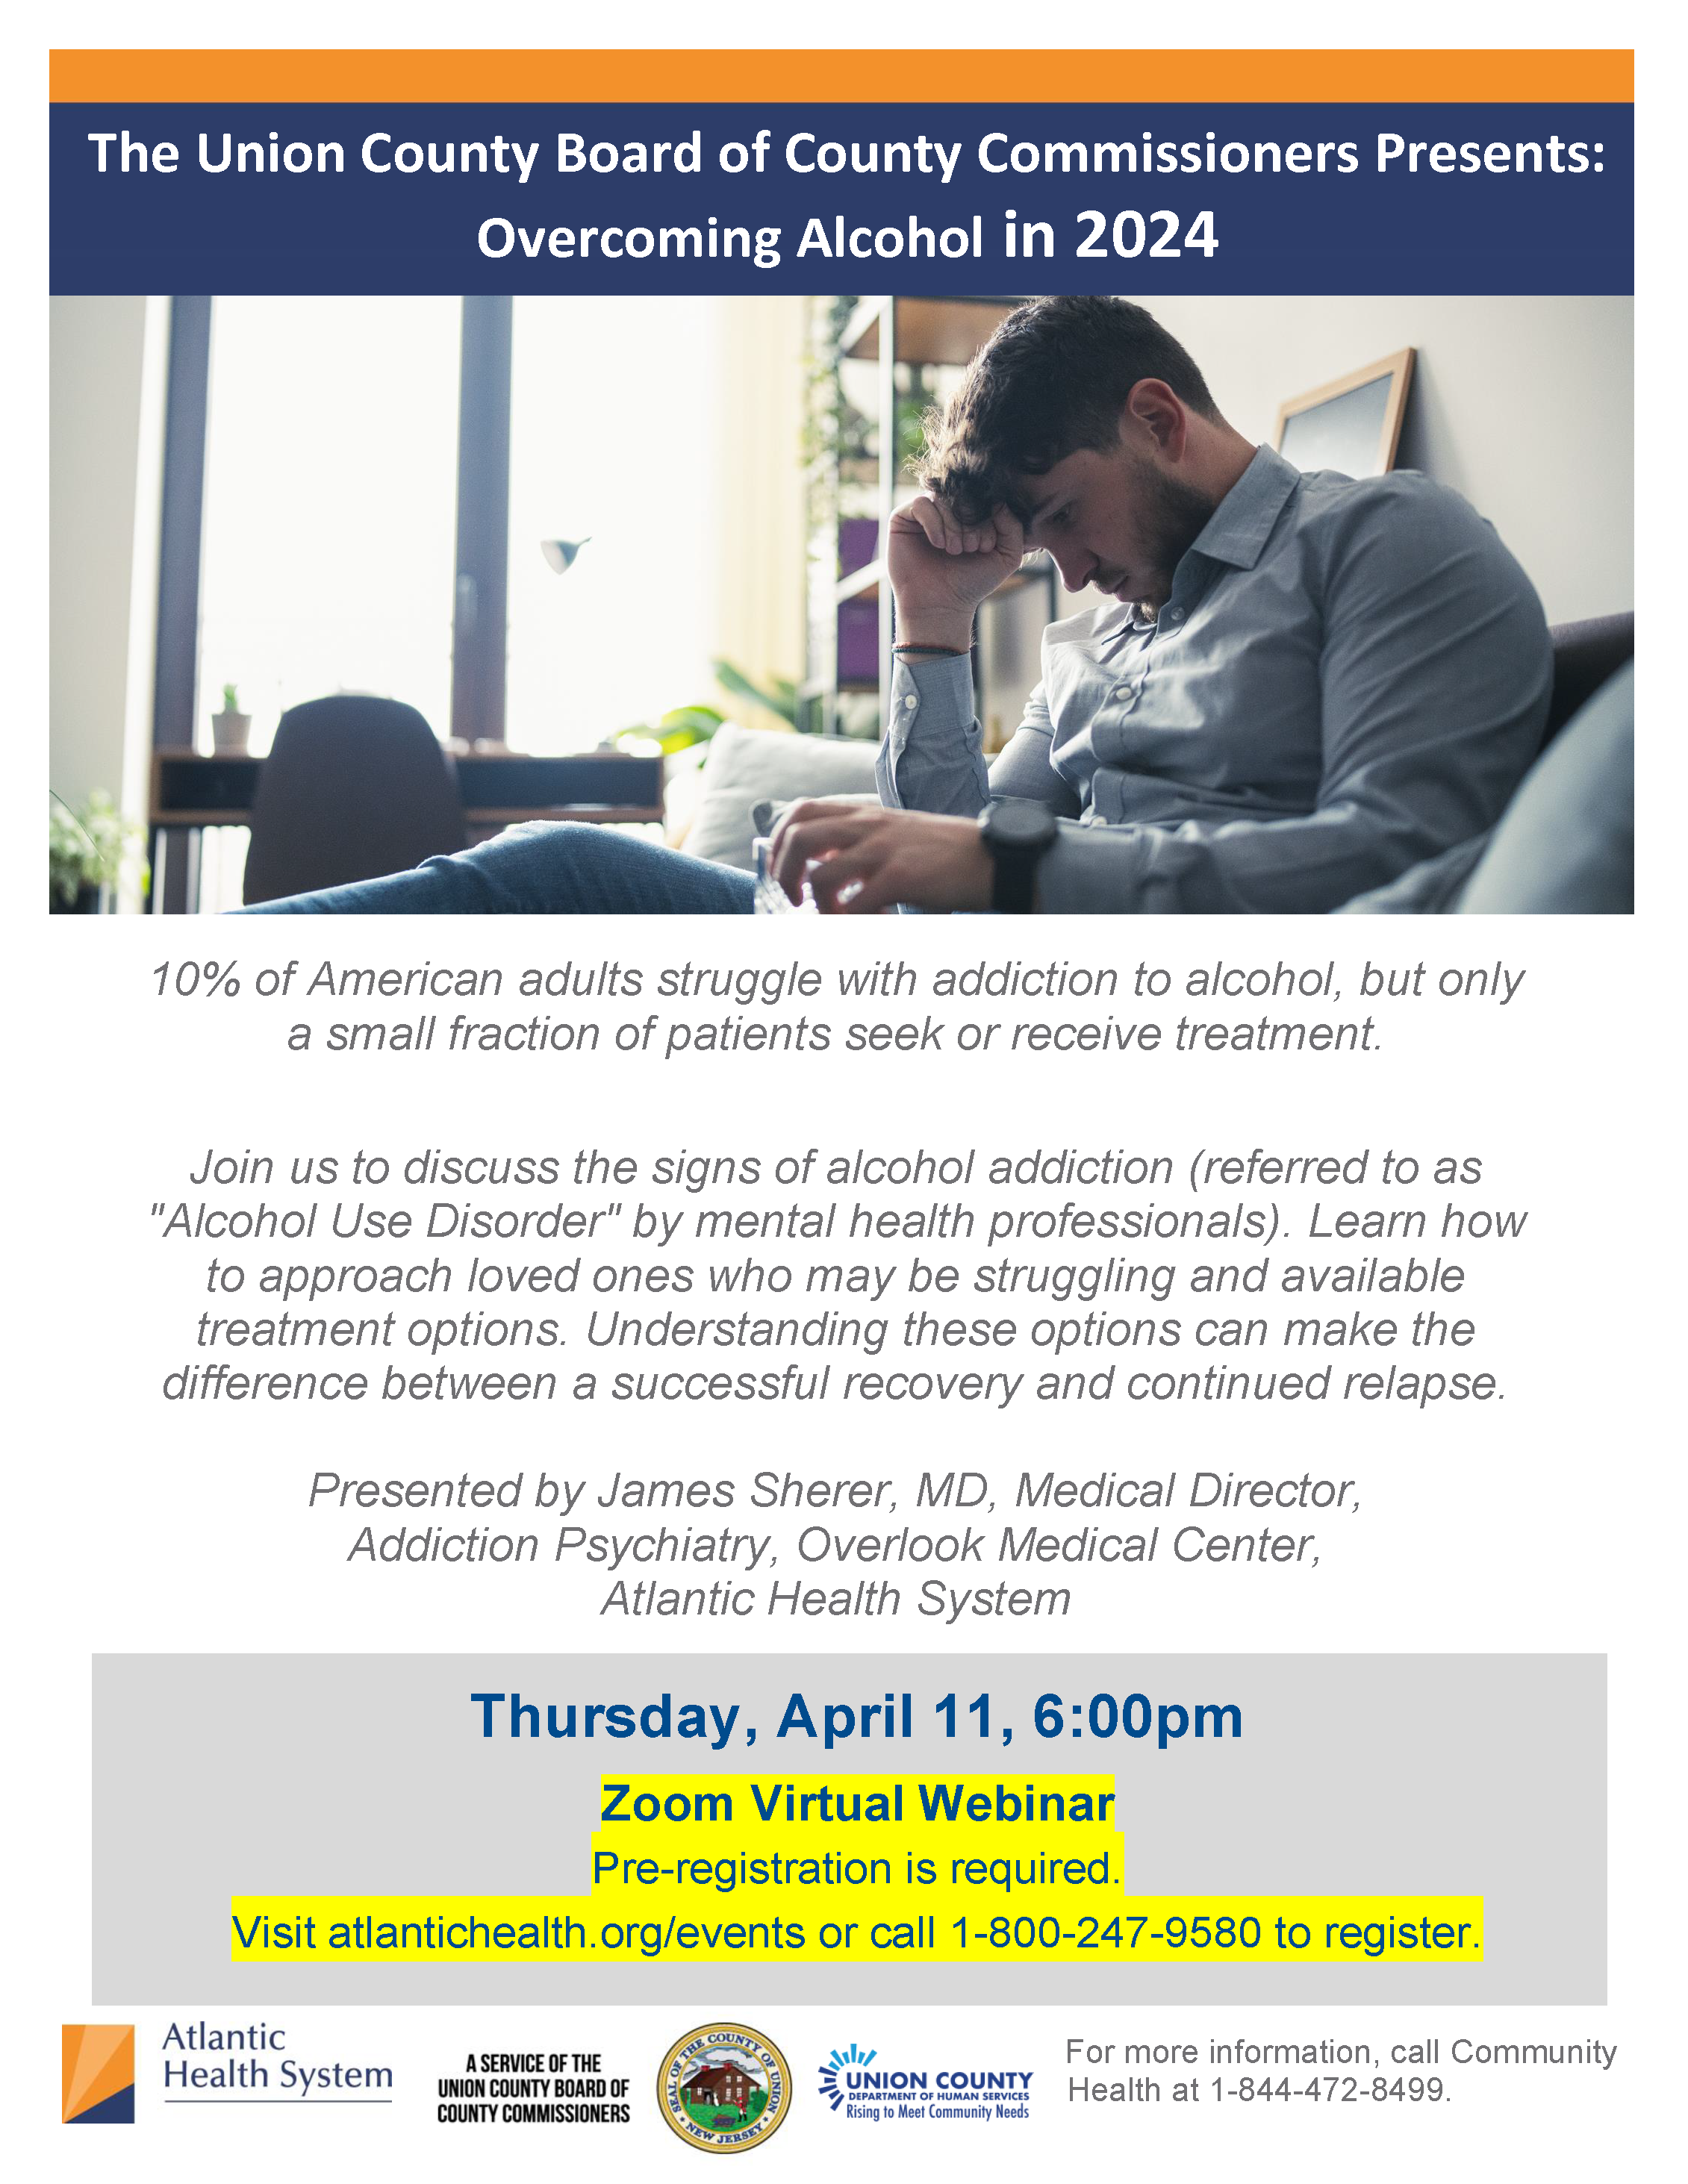 Union County presents: “Overcoming Alcohol In 2024” A Virtual Learning Session, April 11th